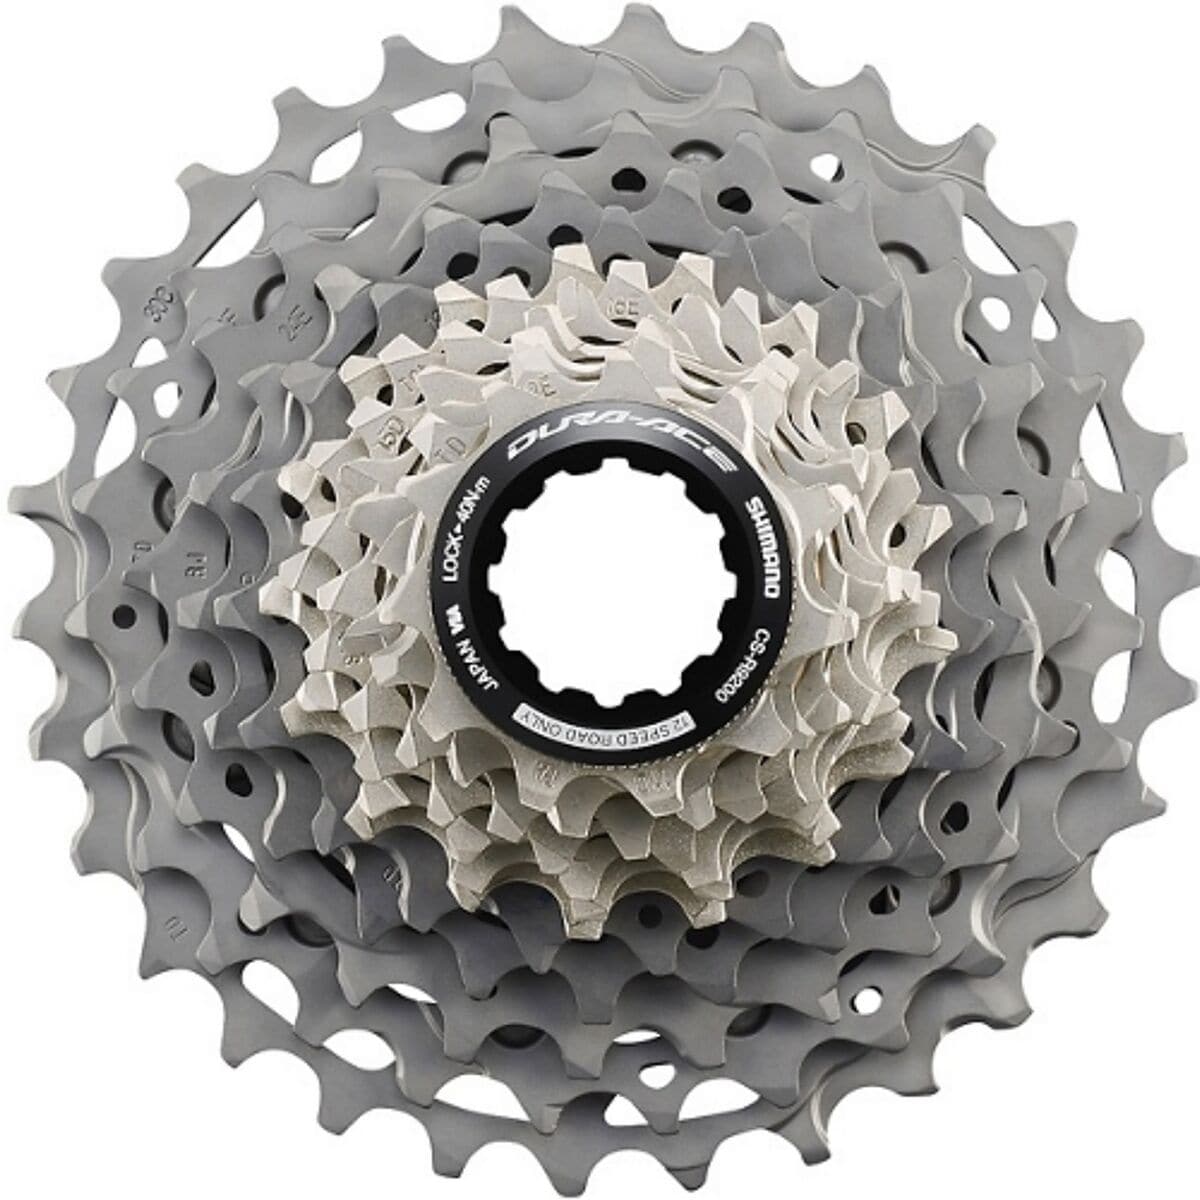 Photos - Bicycle Parts Shimano Dura-Ace CS-R9200 12-Speed Cassette 